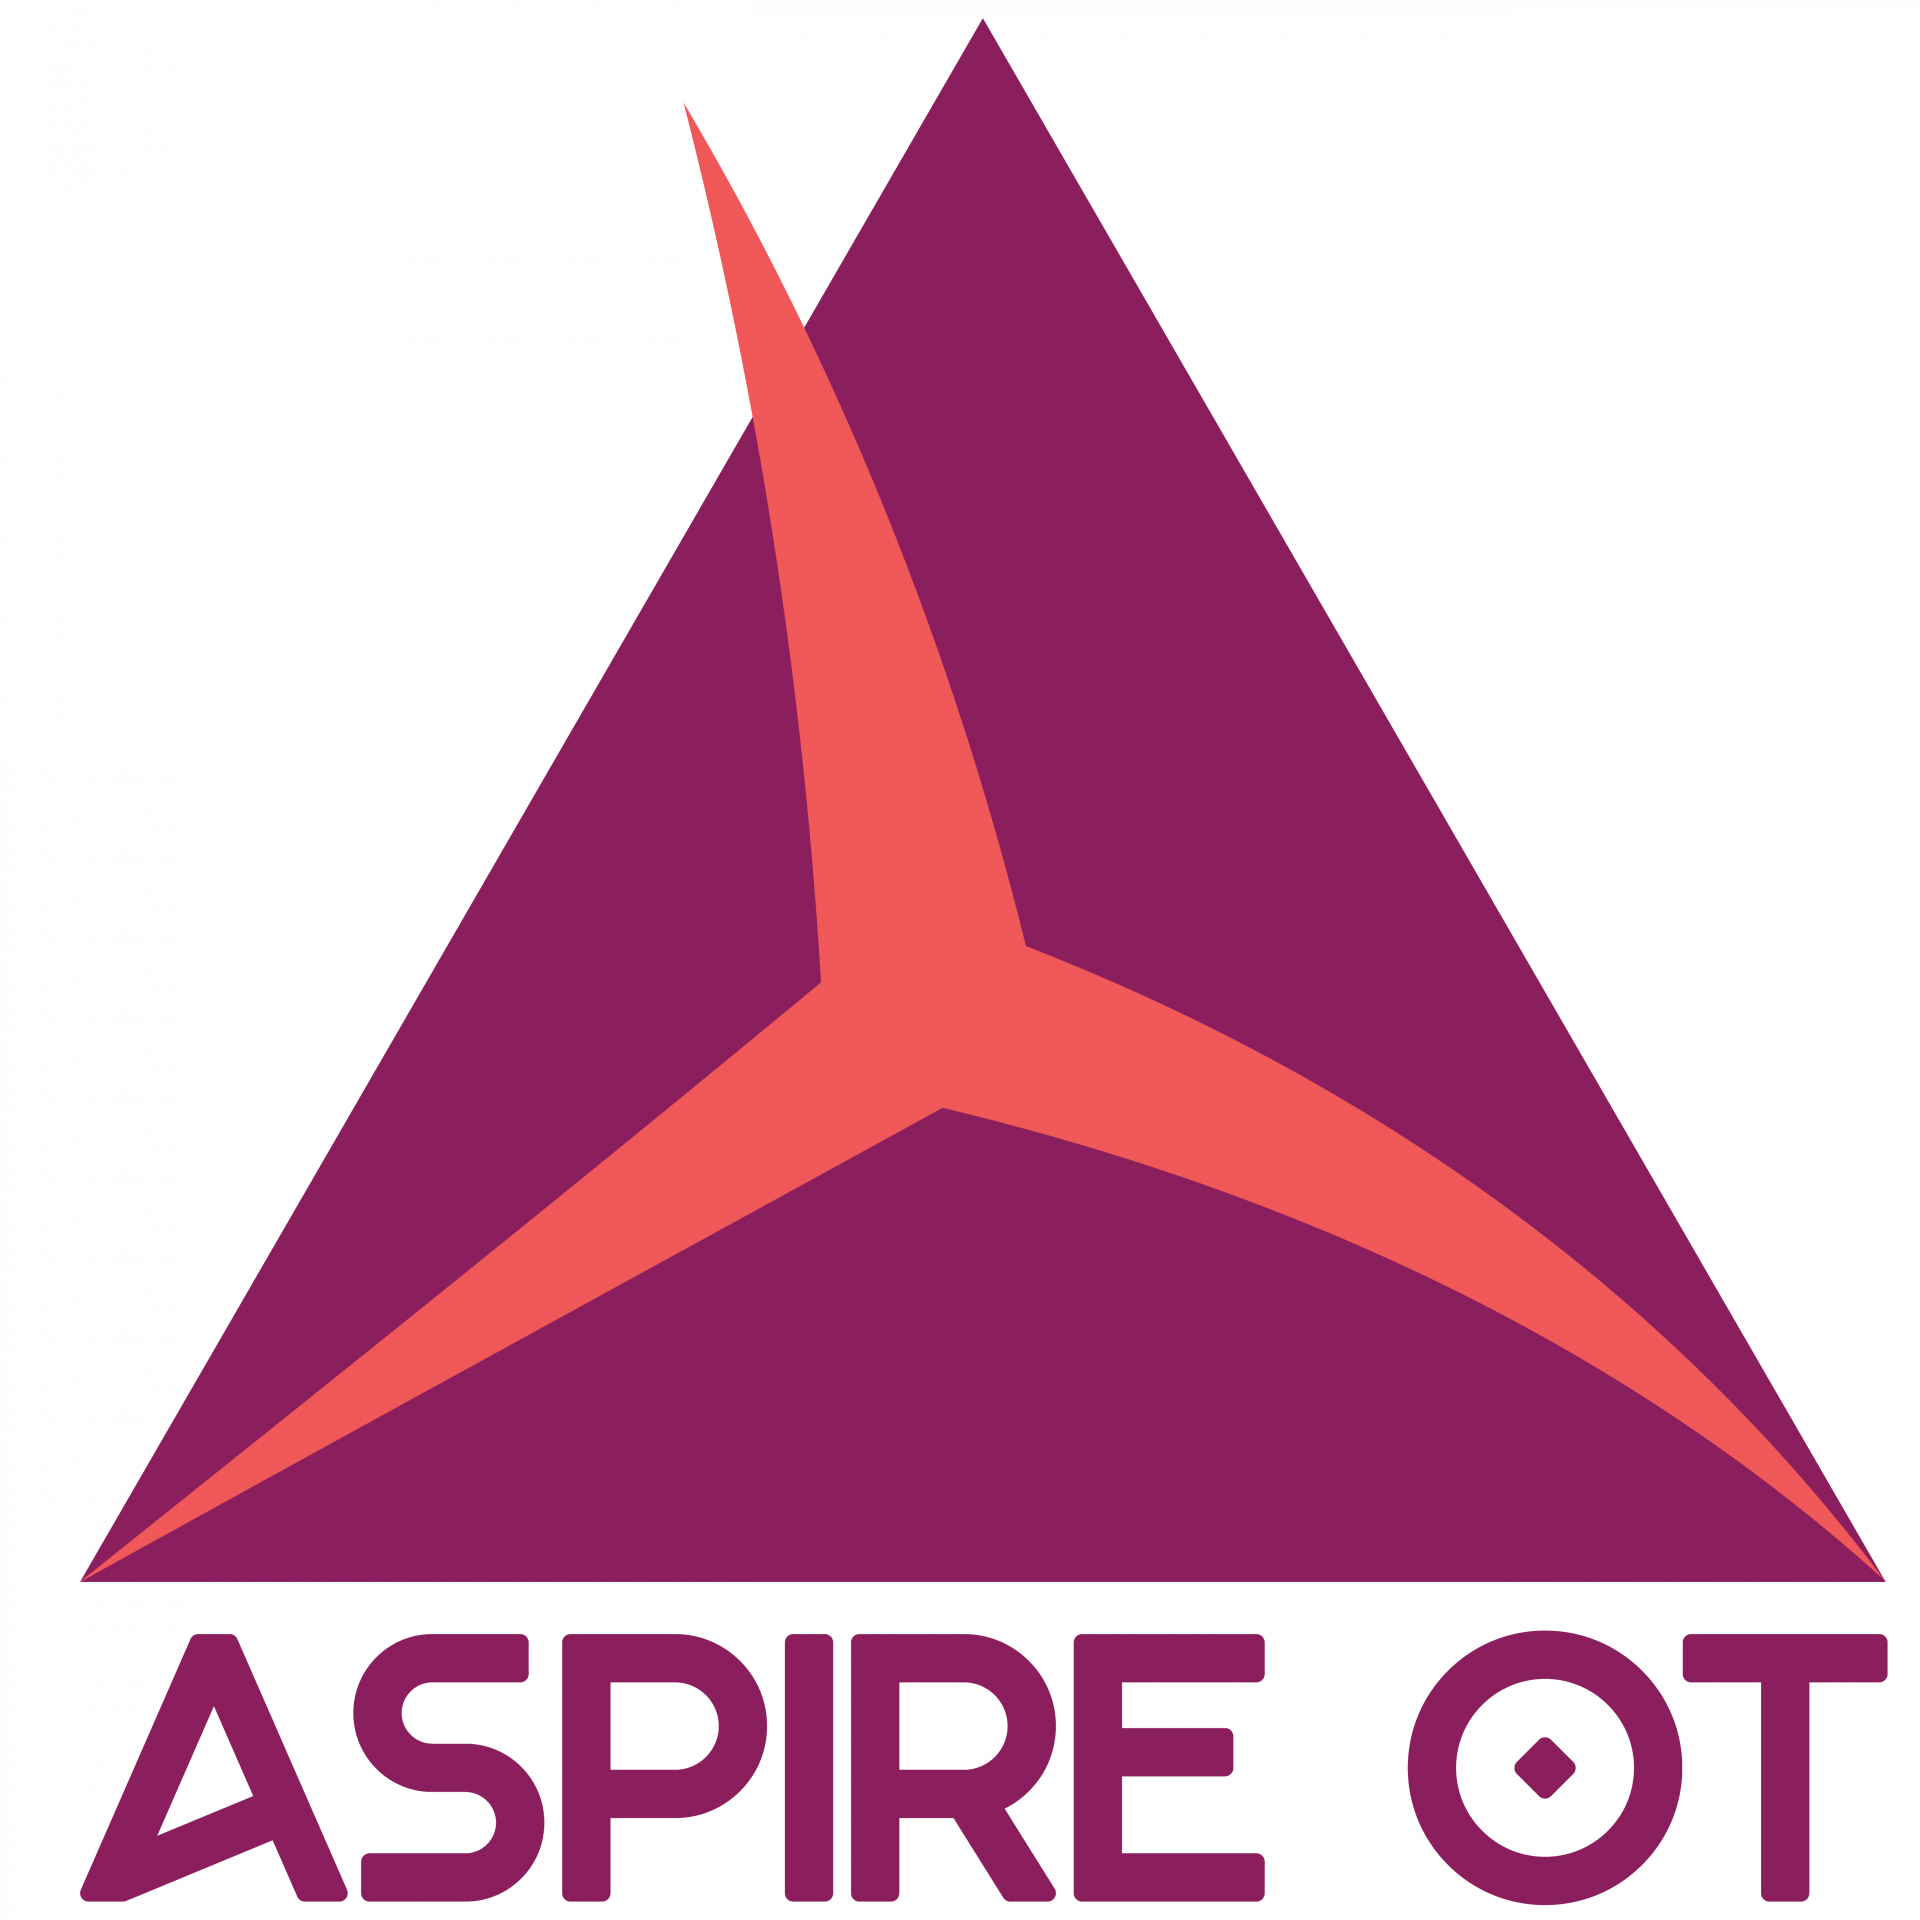 Logo for Aspire OT, purple triangle with orange 3 point star and words “Aspire OT”